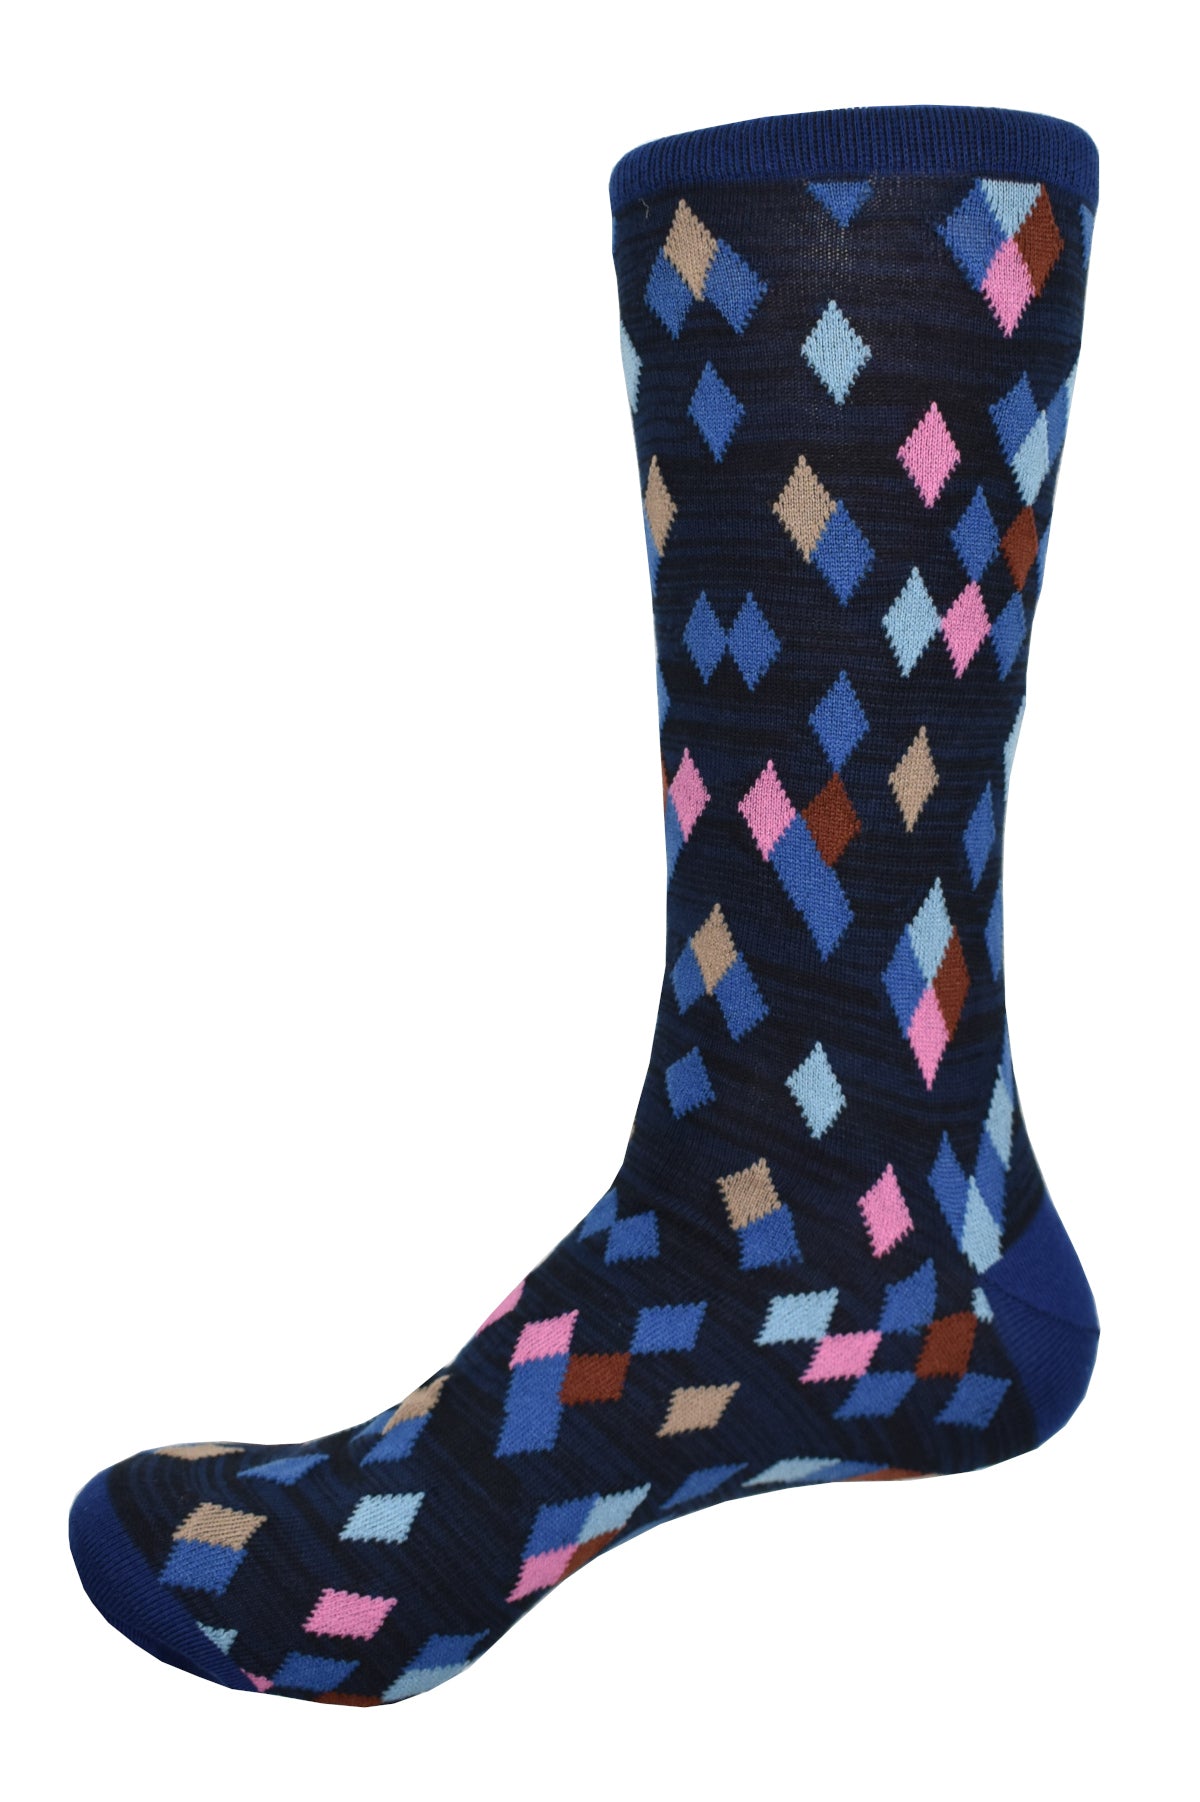 Stay comfy and stylish with the Marcello Navy Floating Diamonds socks. Made with soft 97% cotton and 3% lycra, it offers excellent comfort. The melange stripes and floating diamonds add a cool touch to your fashion game.